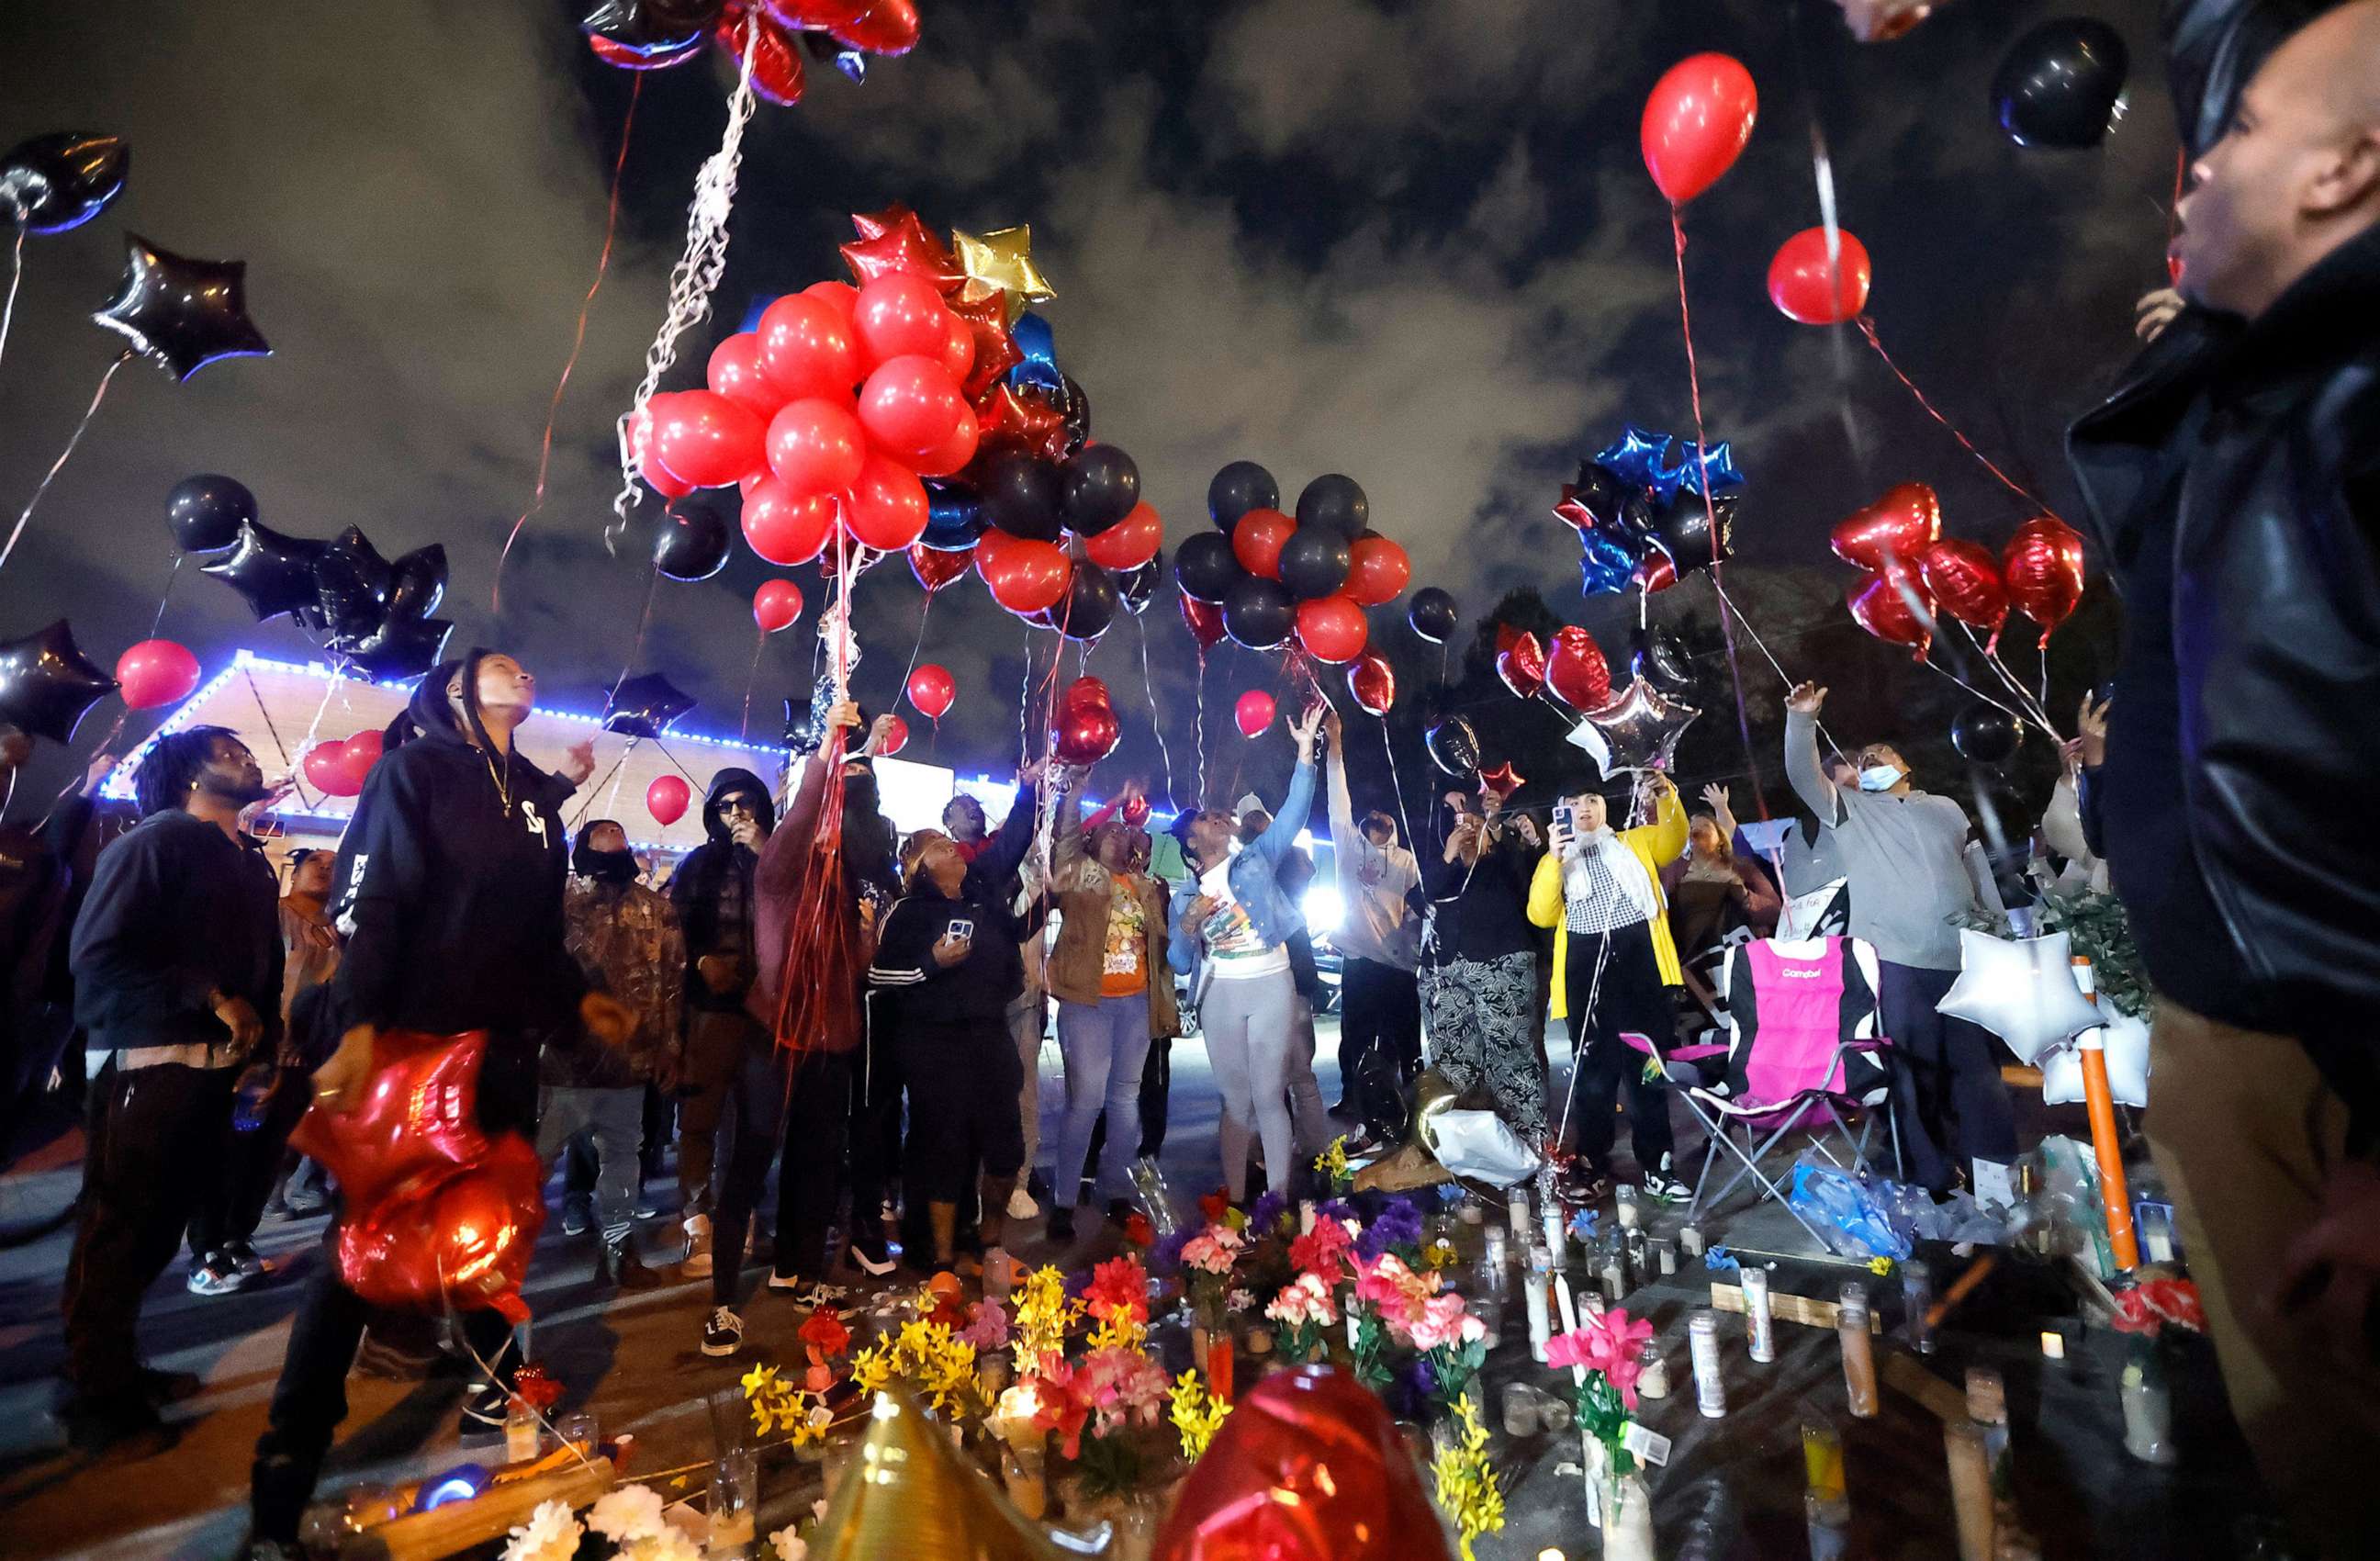 PHOTO: As attendees say "we love you boo-boo" balloons are released during a vigil for Darryl Williams outside Supreme Sweepstakes in Raleigh, N.C., Jan. 19, 2023. Williams, 32, died after he was tased by Raleigh police officers.